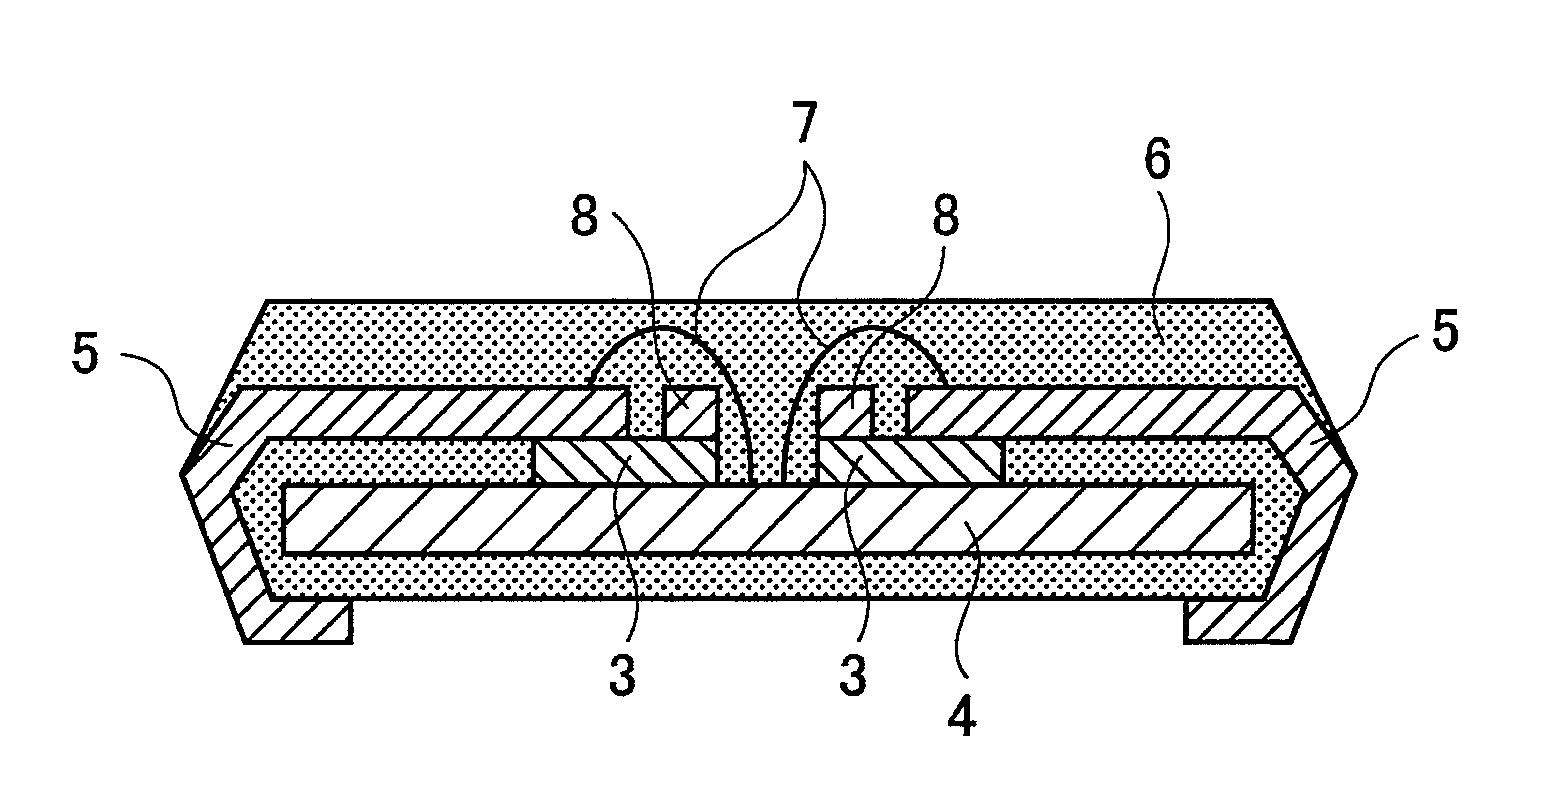 Thermoplastic resin composition for semiconductor, adhesion film, lead frame, and semiconductor device using the same, and method of producing semiconductor device